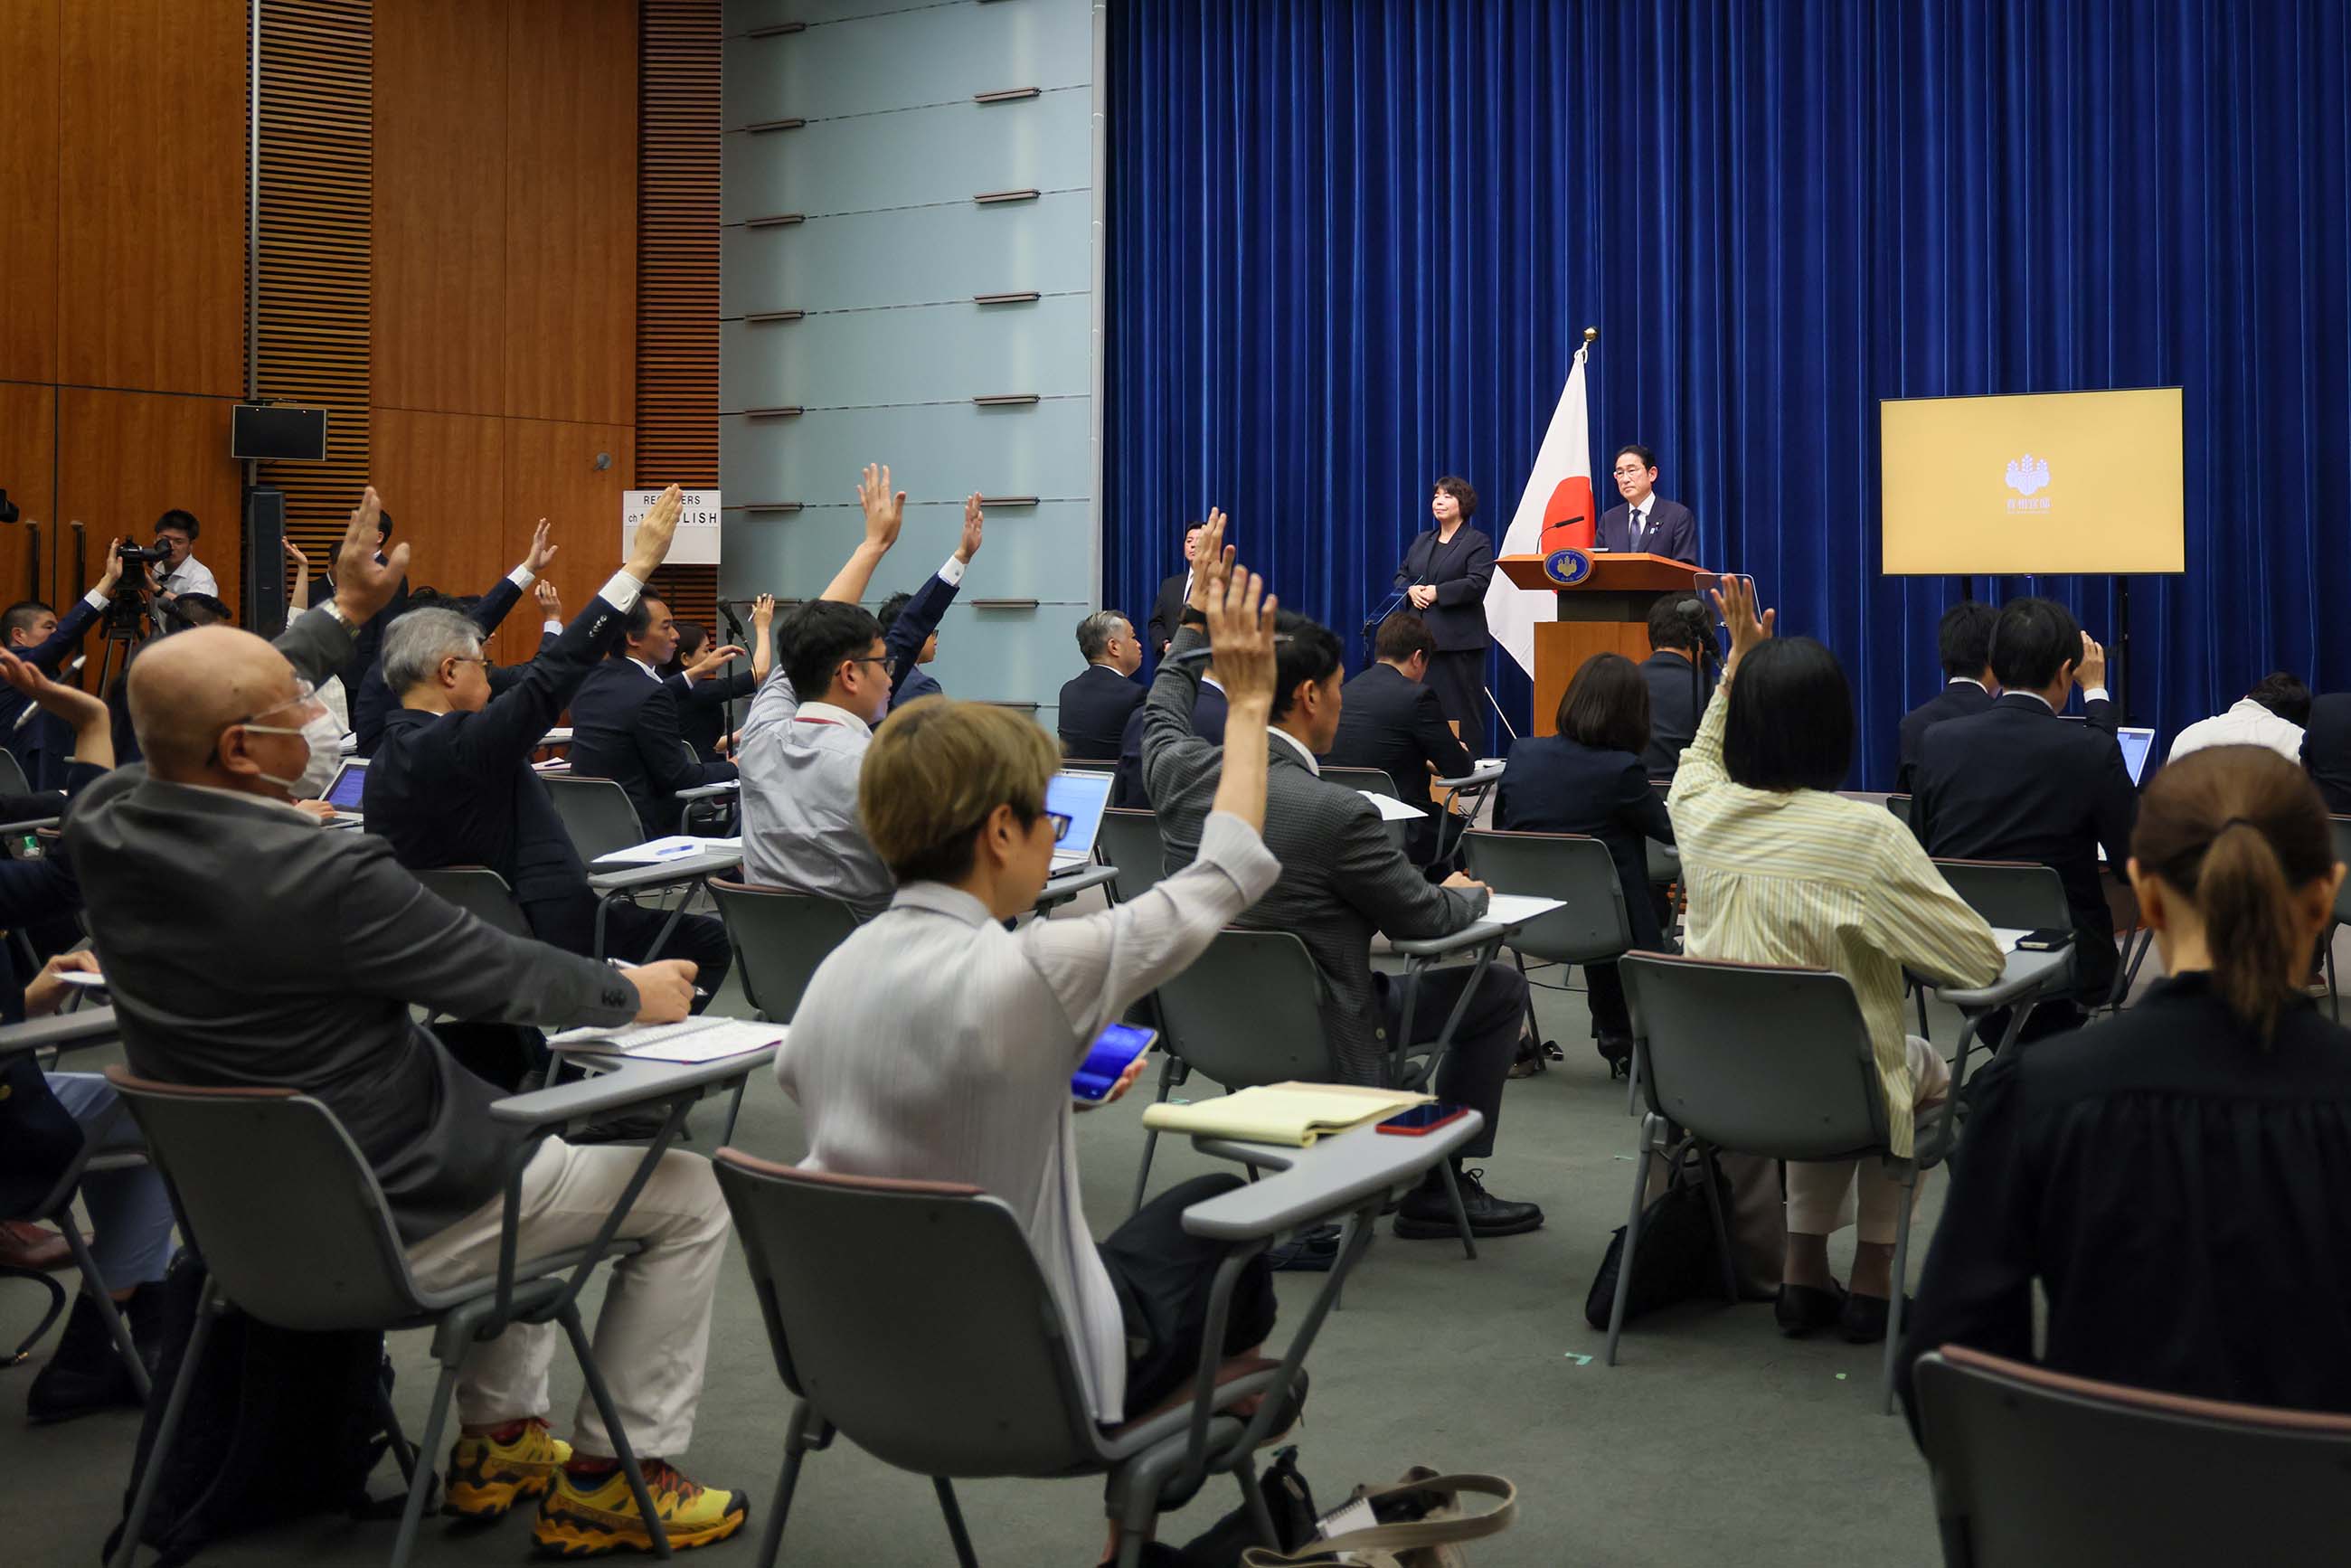 Prime Minister Kishida answering questions from the journalists (2)